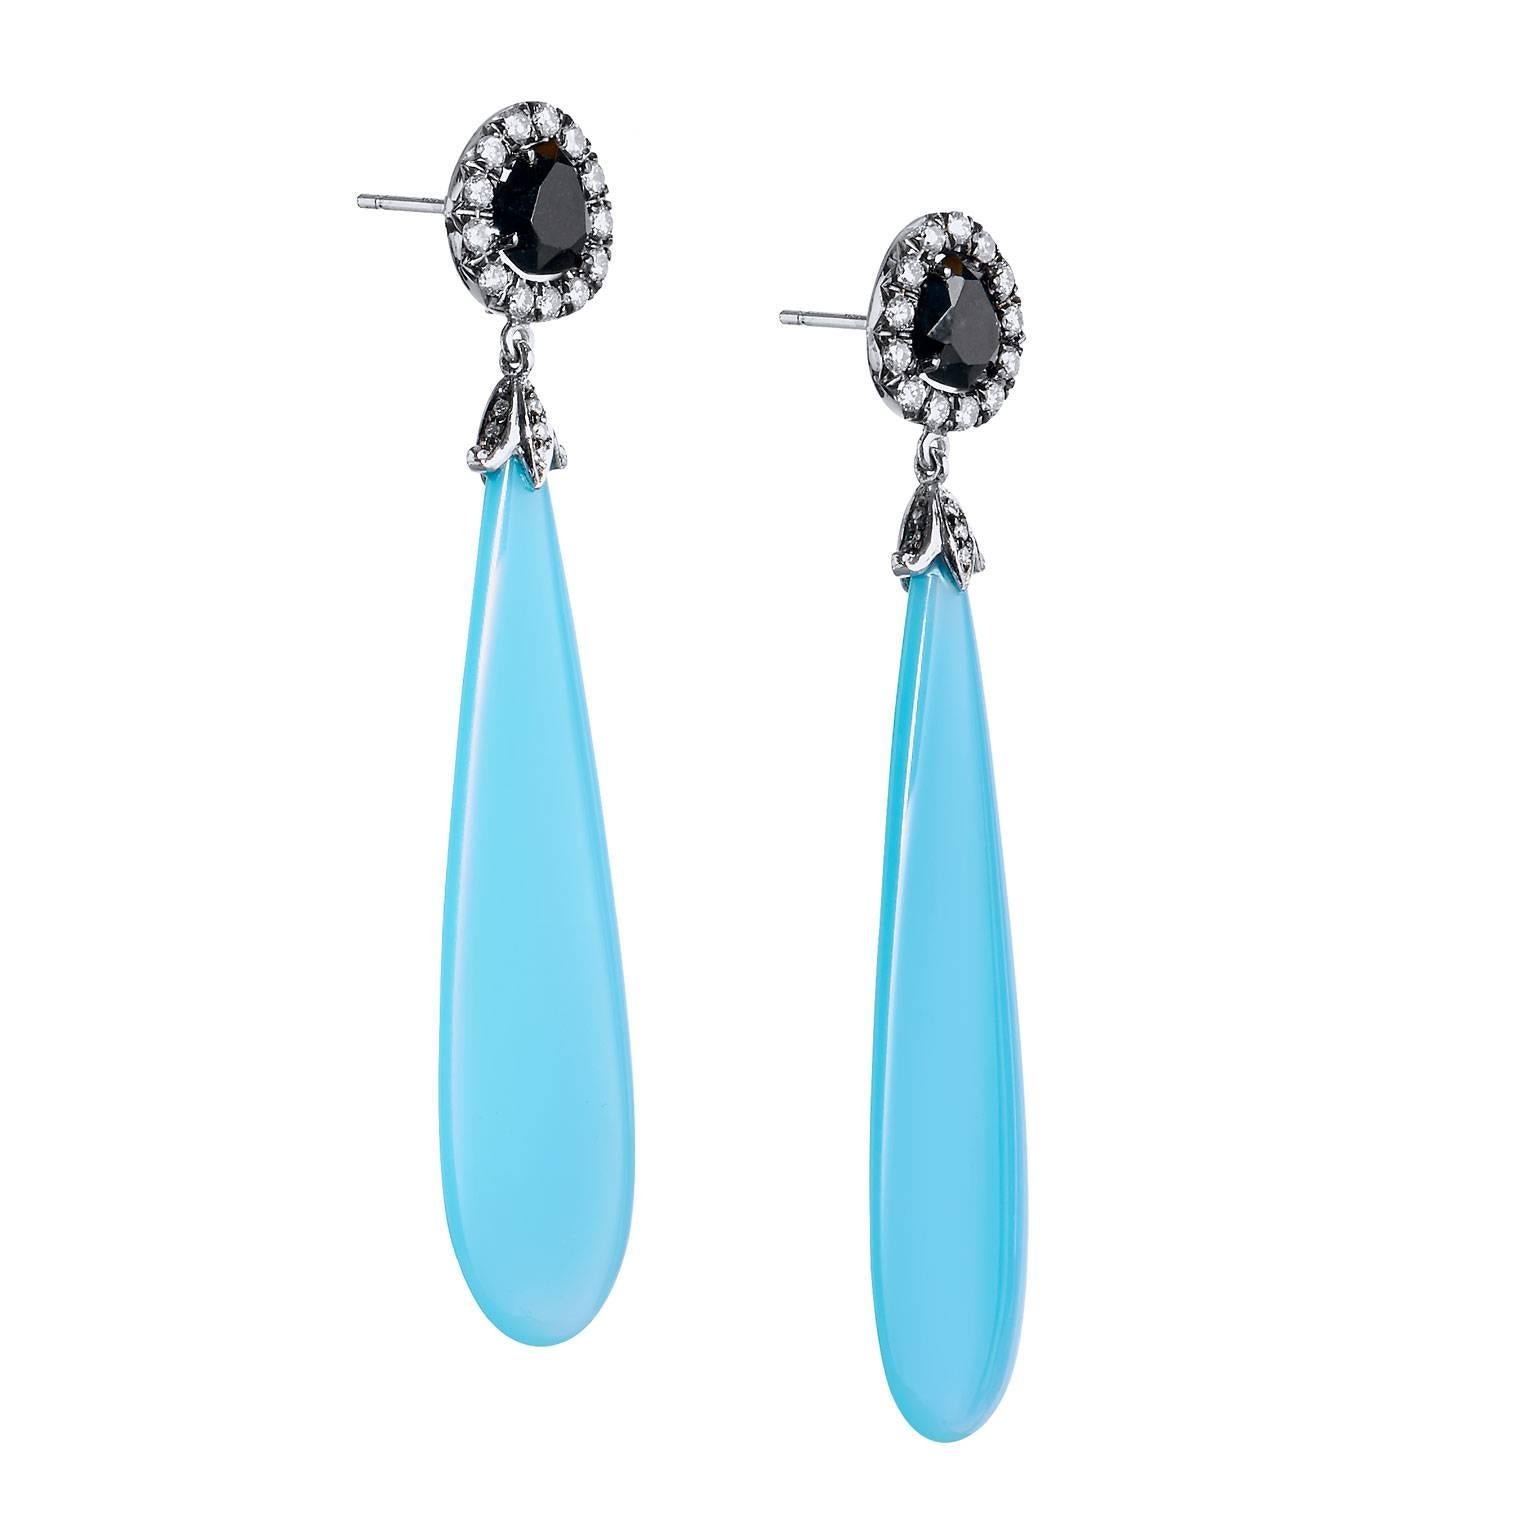 Luscious earrings hand crafted and designed by H earrings in eighteen karat white gold, Fashionably sized at 2 1/2 inches long, featuring tongue cut Laguna Blue Agate Drops, attached to a button top of Black Spinel, surrounded by white round